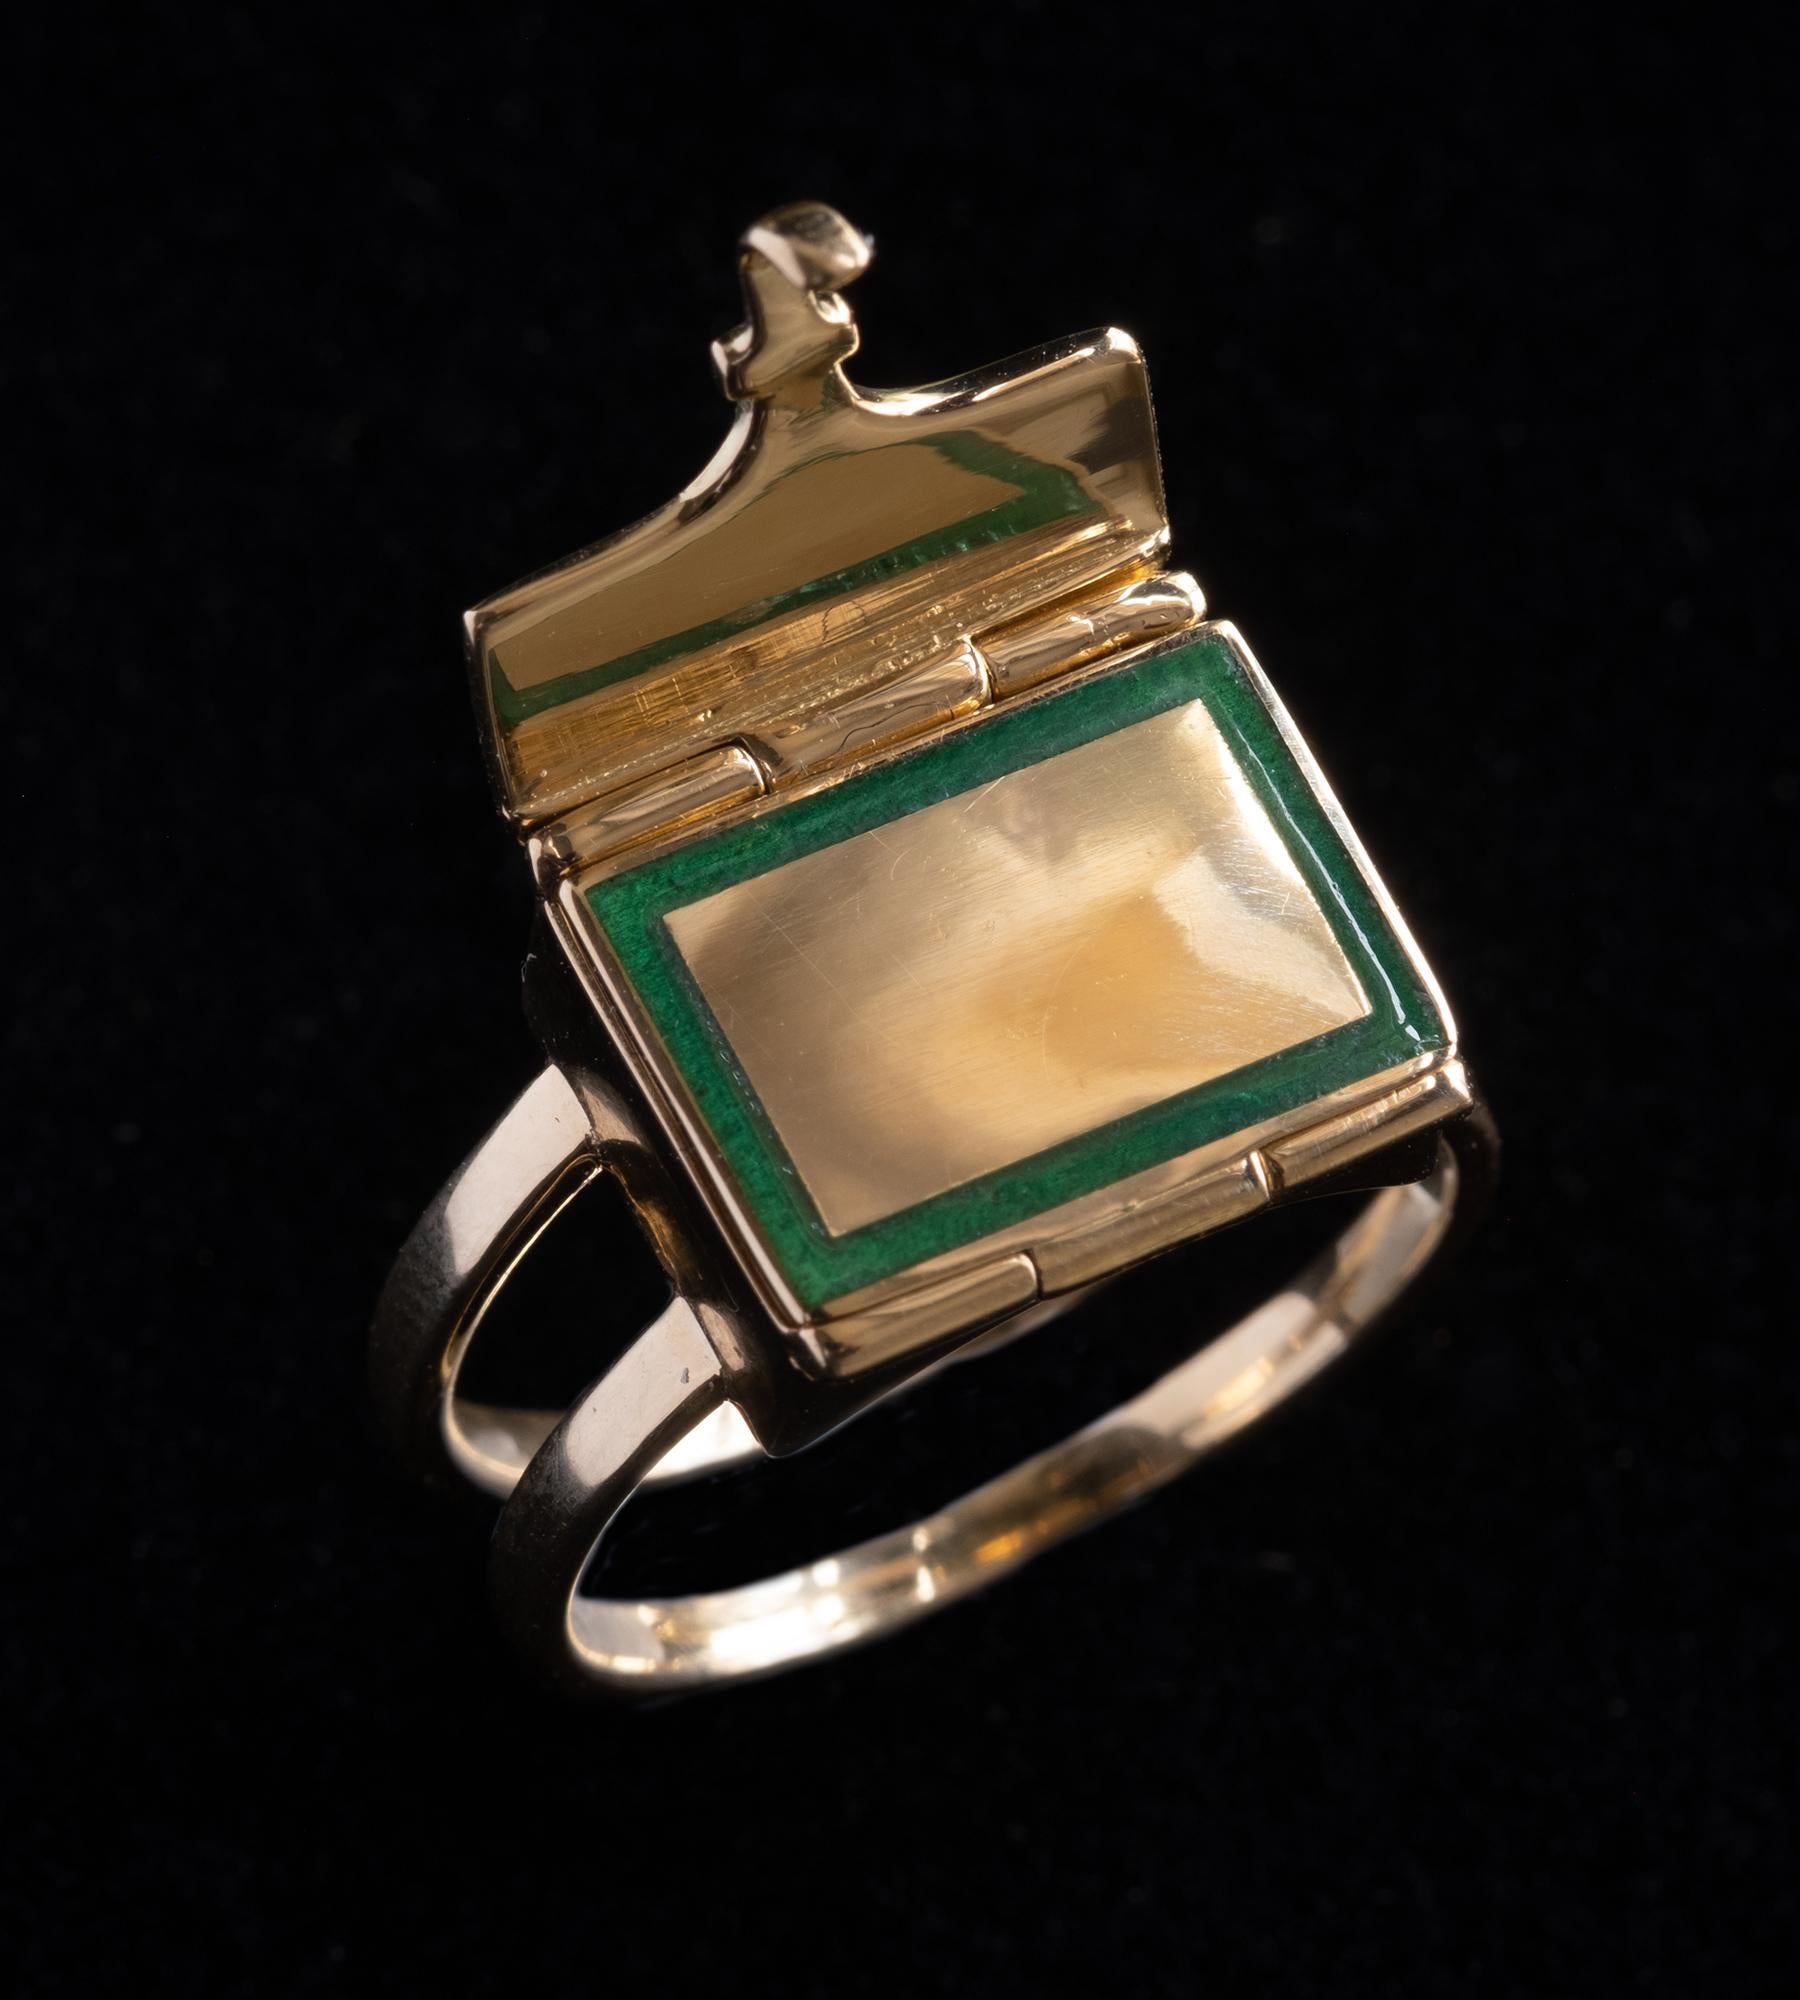 Regency The Fleur Fairfax Book Ring in 18ct Gold and Enamel - Serpentine Green US 7.5 For Sale